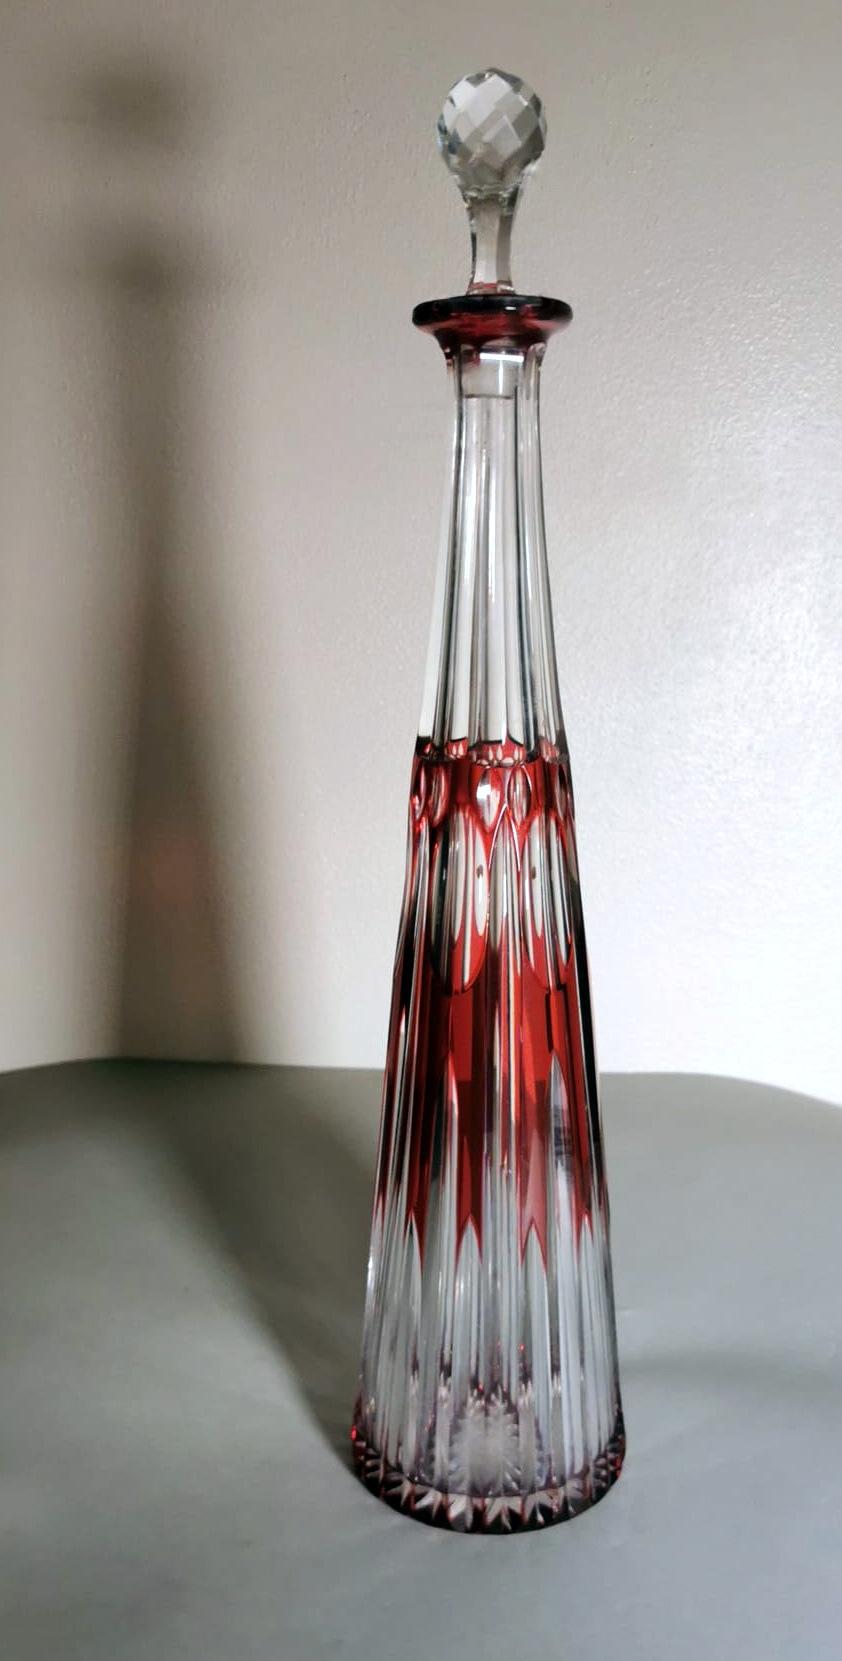 We kindly suggest you read the whole description, because with it we try to give you detailed technical and historical information to guarantee the authenticity of our objects.
Hand-cut and ground red crystal bottle; an excellent lead crystal was